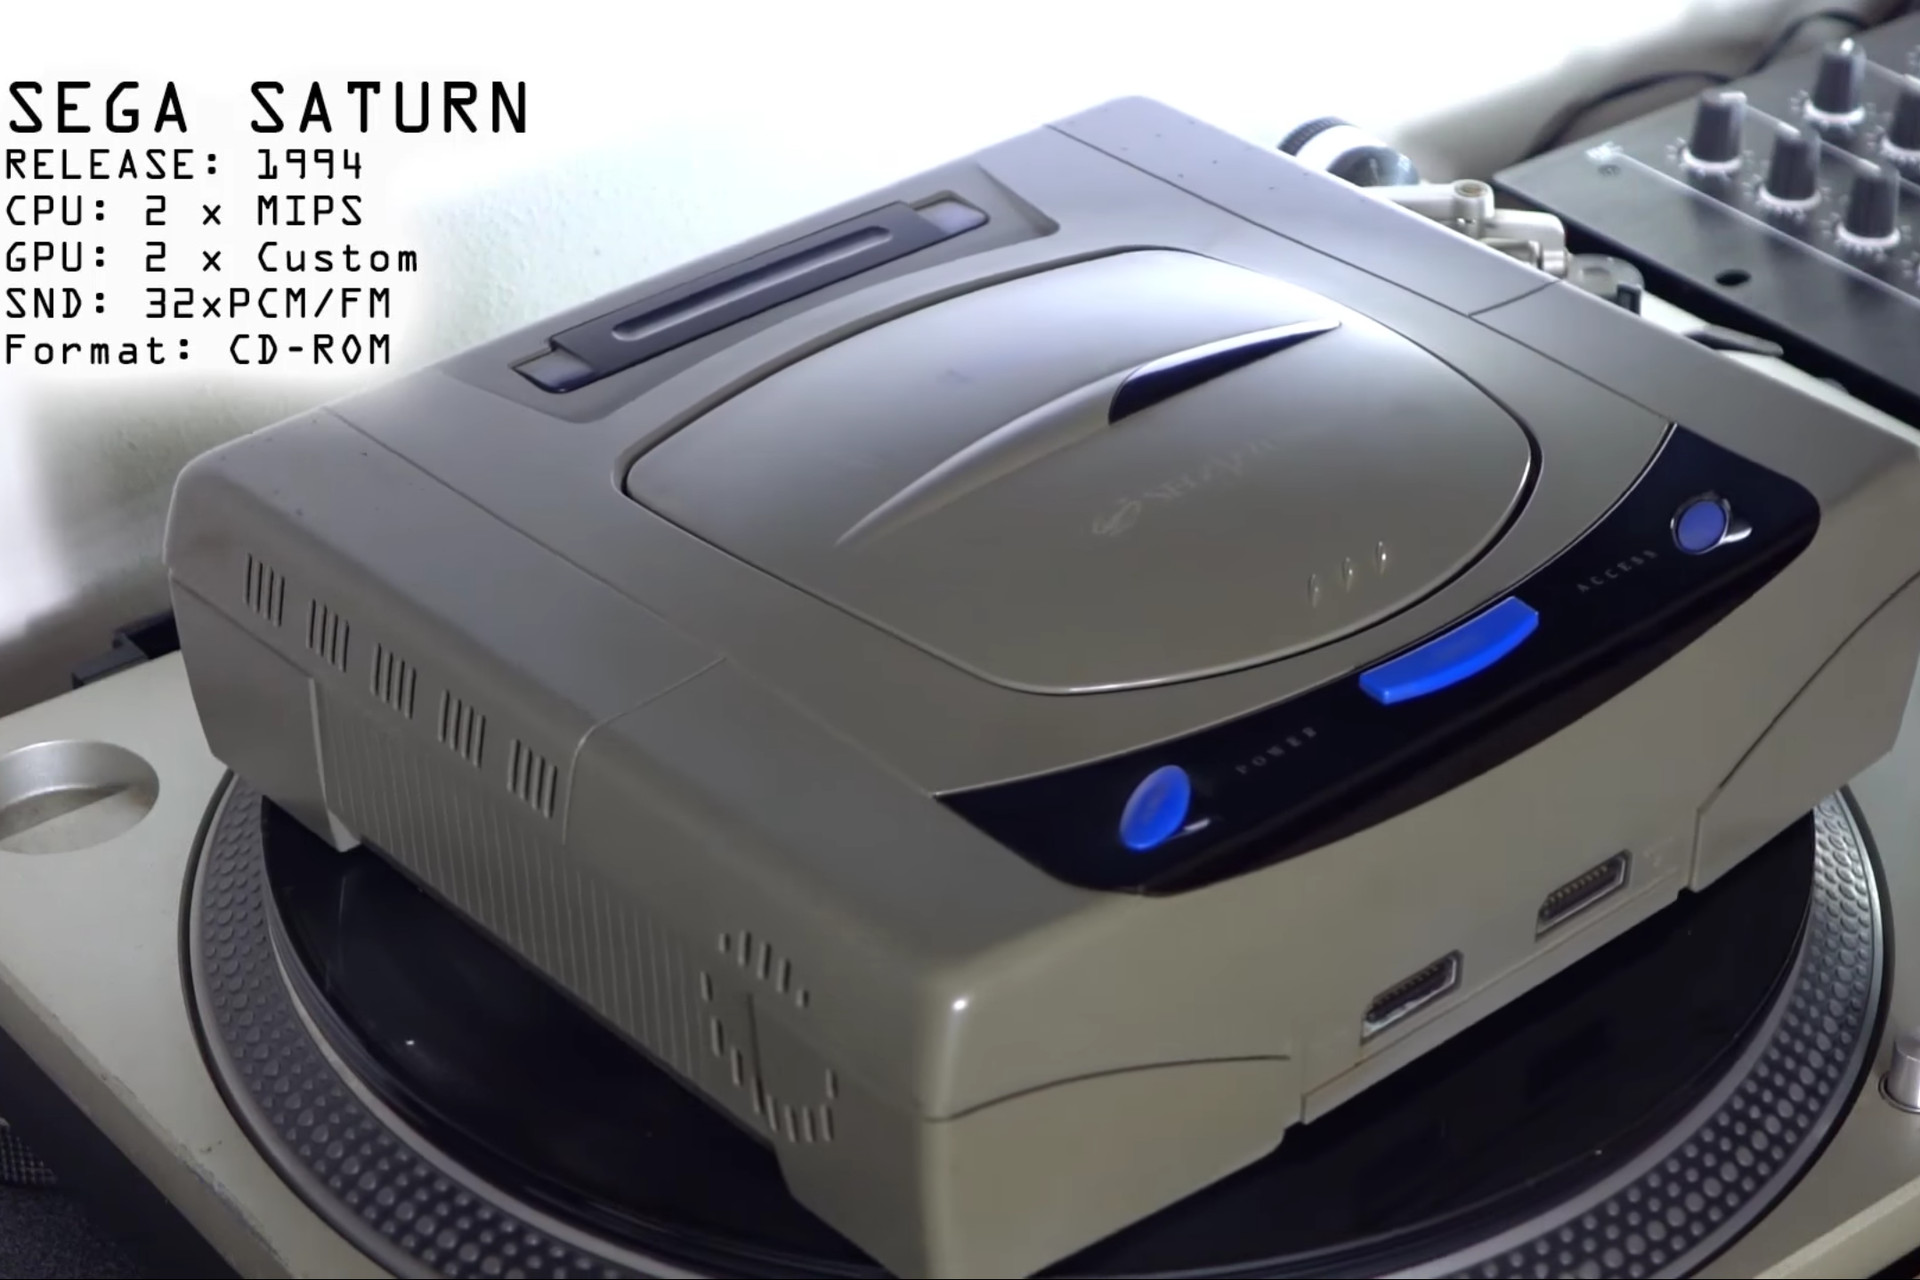 Sega Saturns Drm Has Been Cracked After 20 Years The Verge 5364